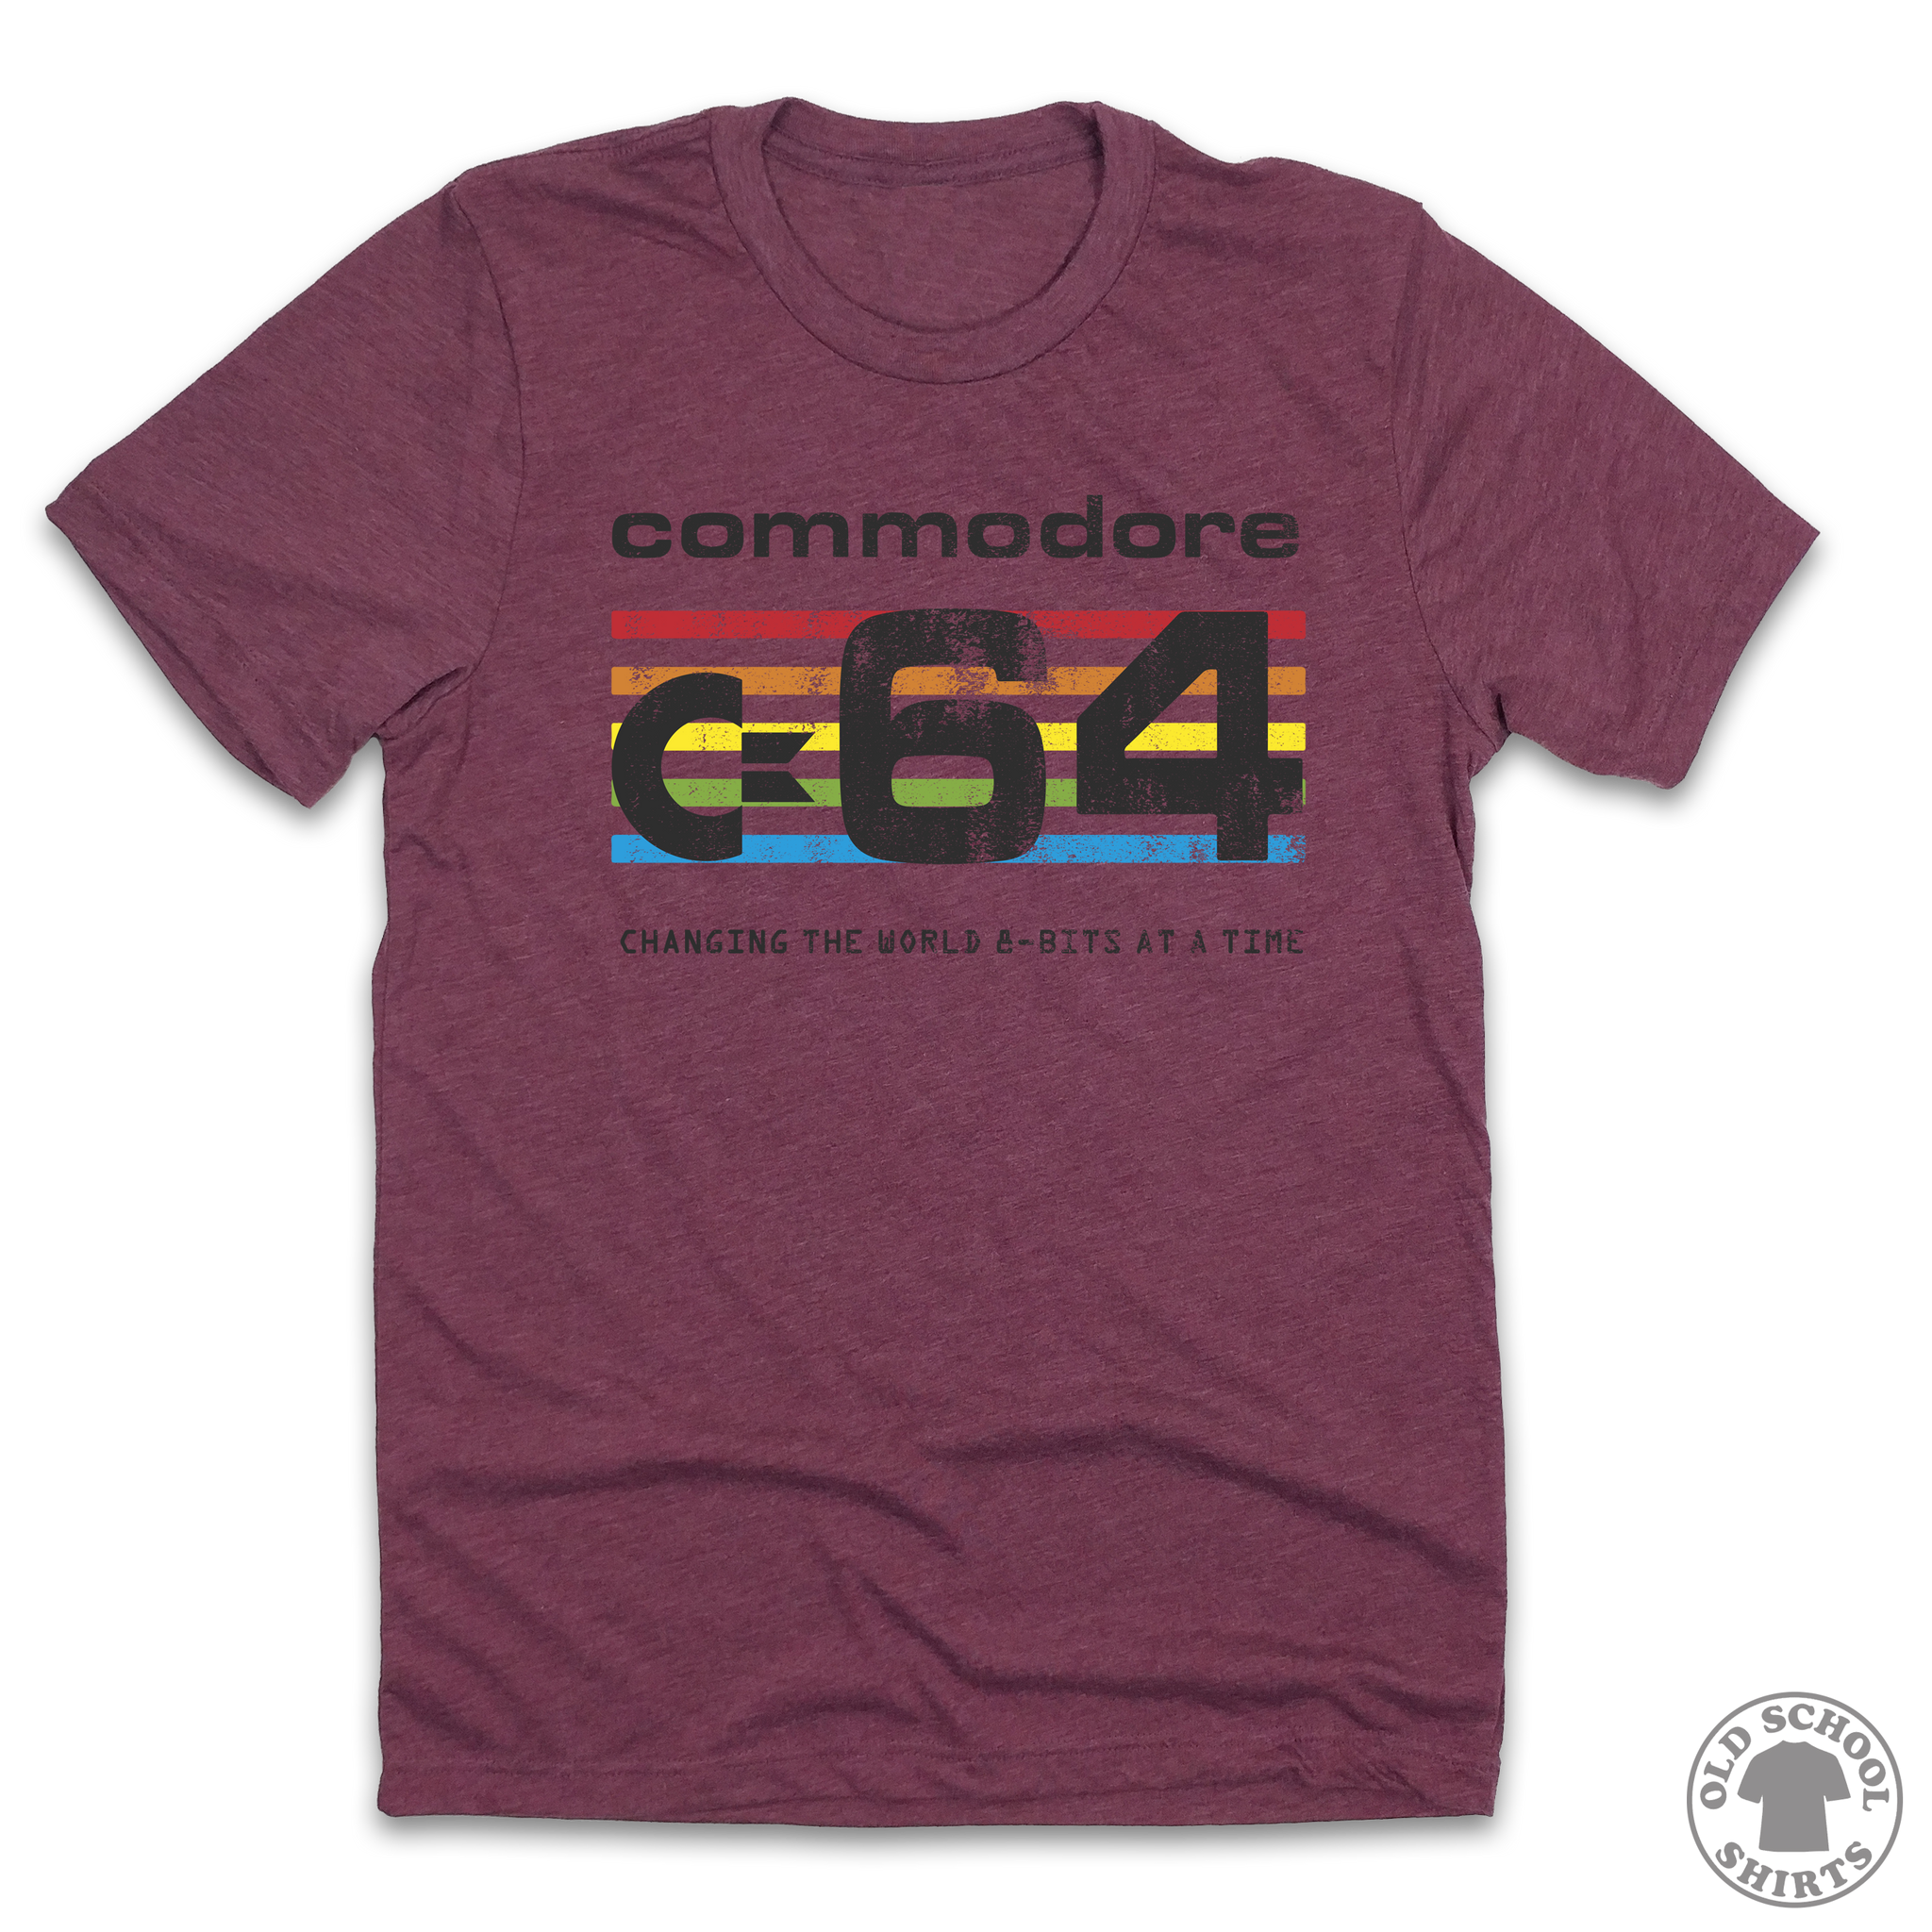 Retro Tech & Video Games - Systems & Consoles Old School Shirts | OldSchoolShirts.com